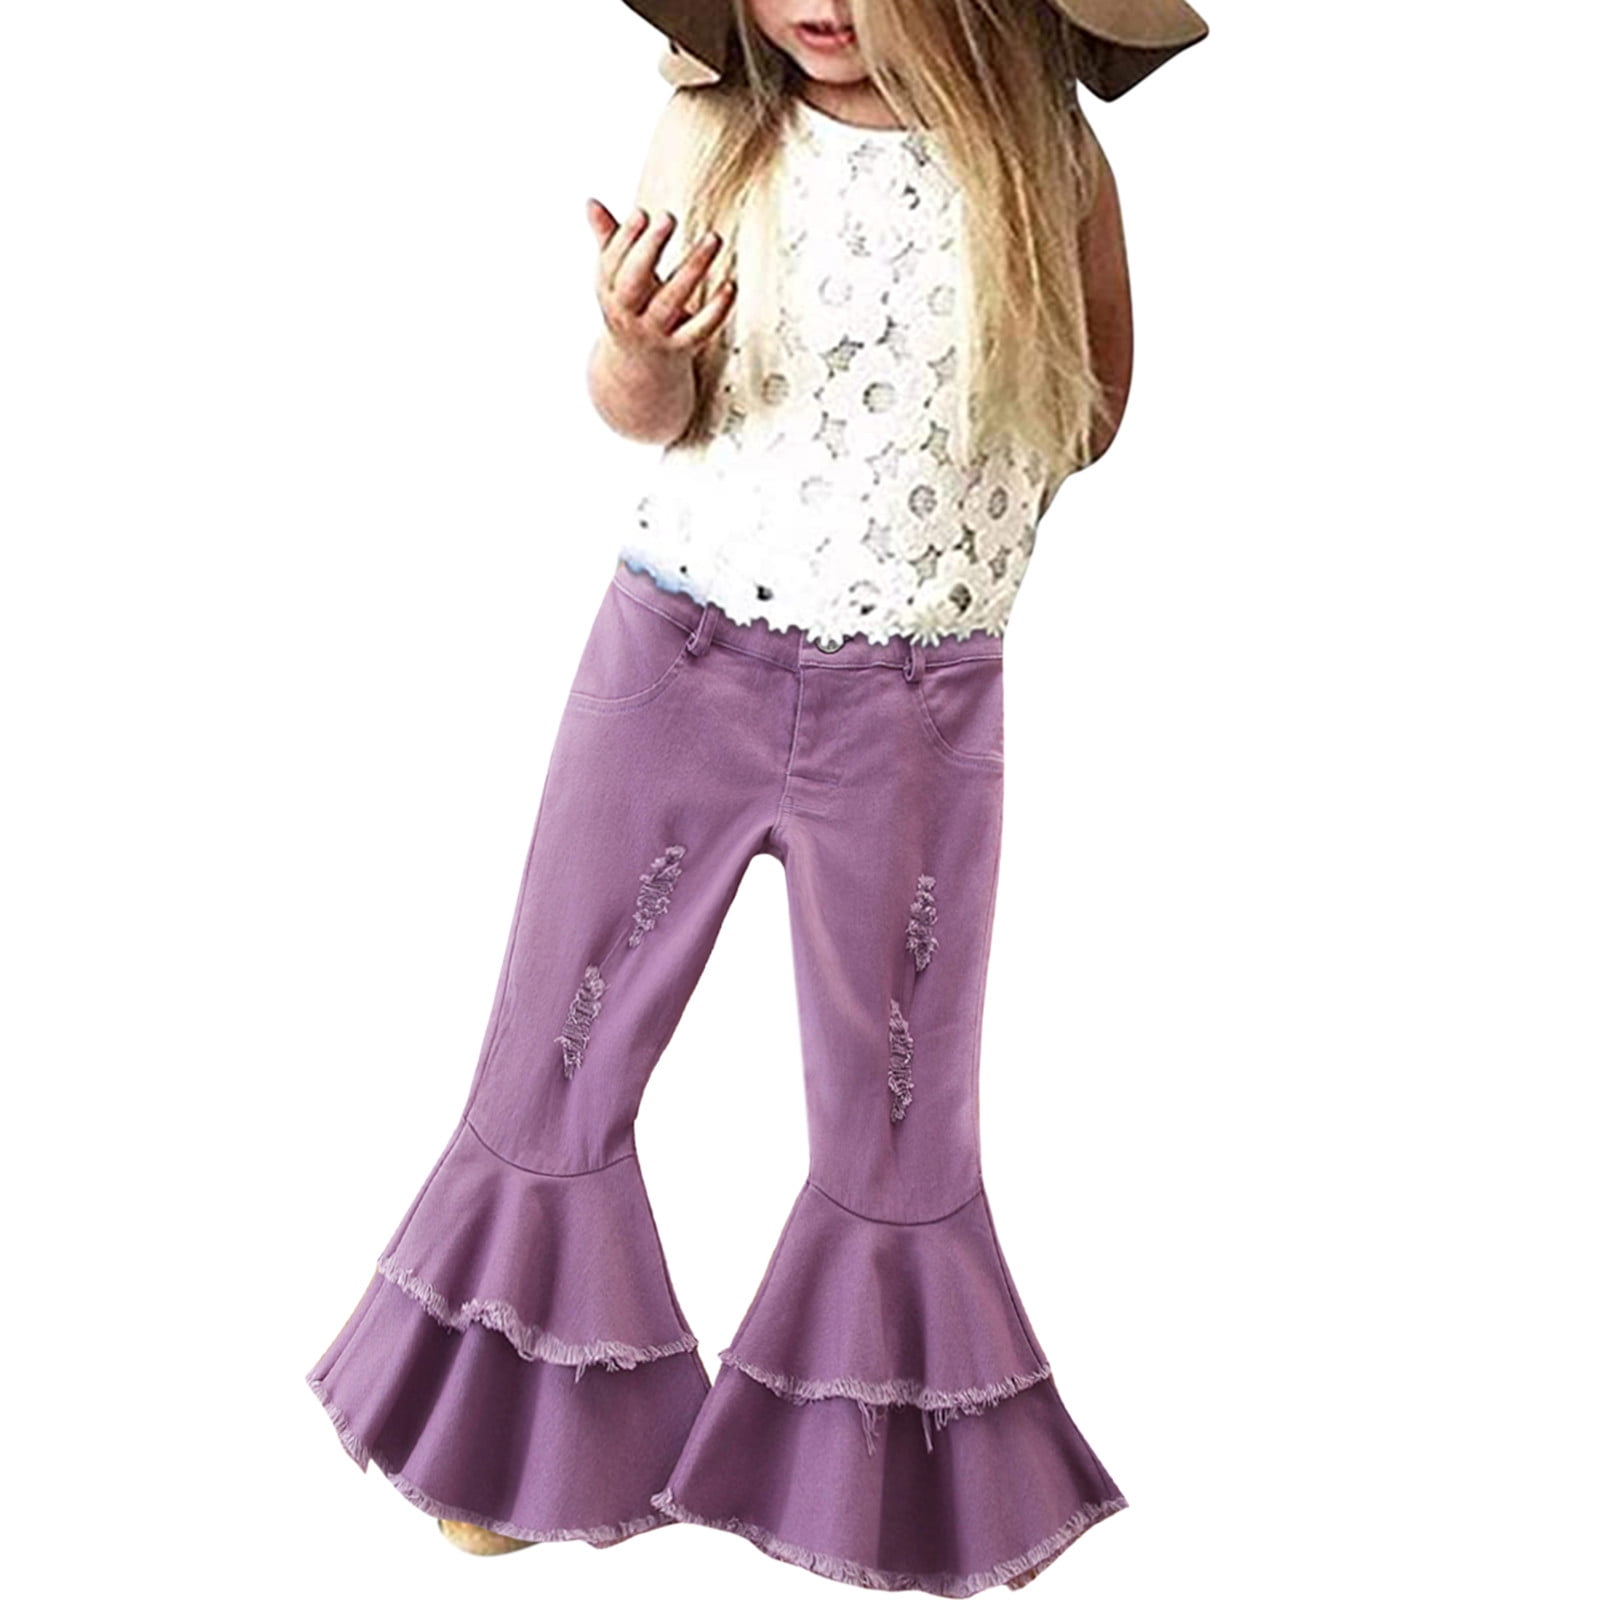 B91xZ Toddler Pants Girls Ruffles Ripped Two Flare Jeans Bottom Trousers  Girls Bell Pants For Kids Baby Denim 16Y Toddler Purple,Sizes 2-3 Years